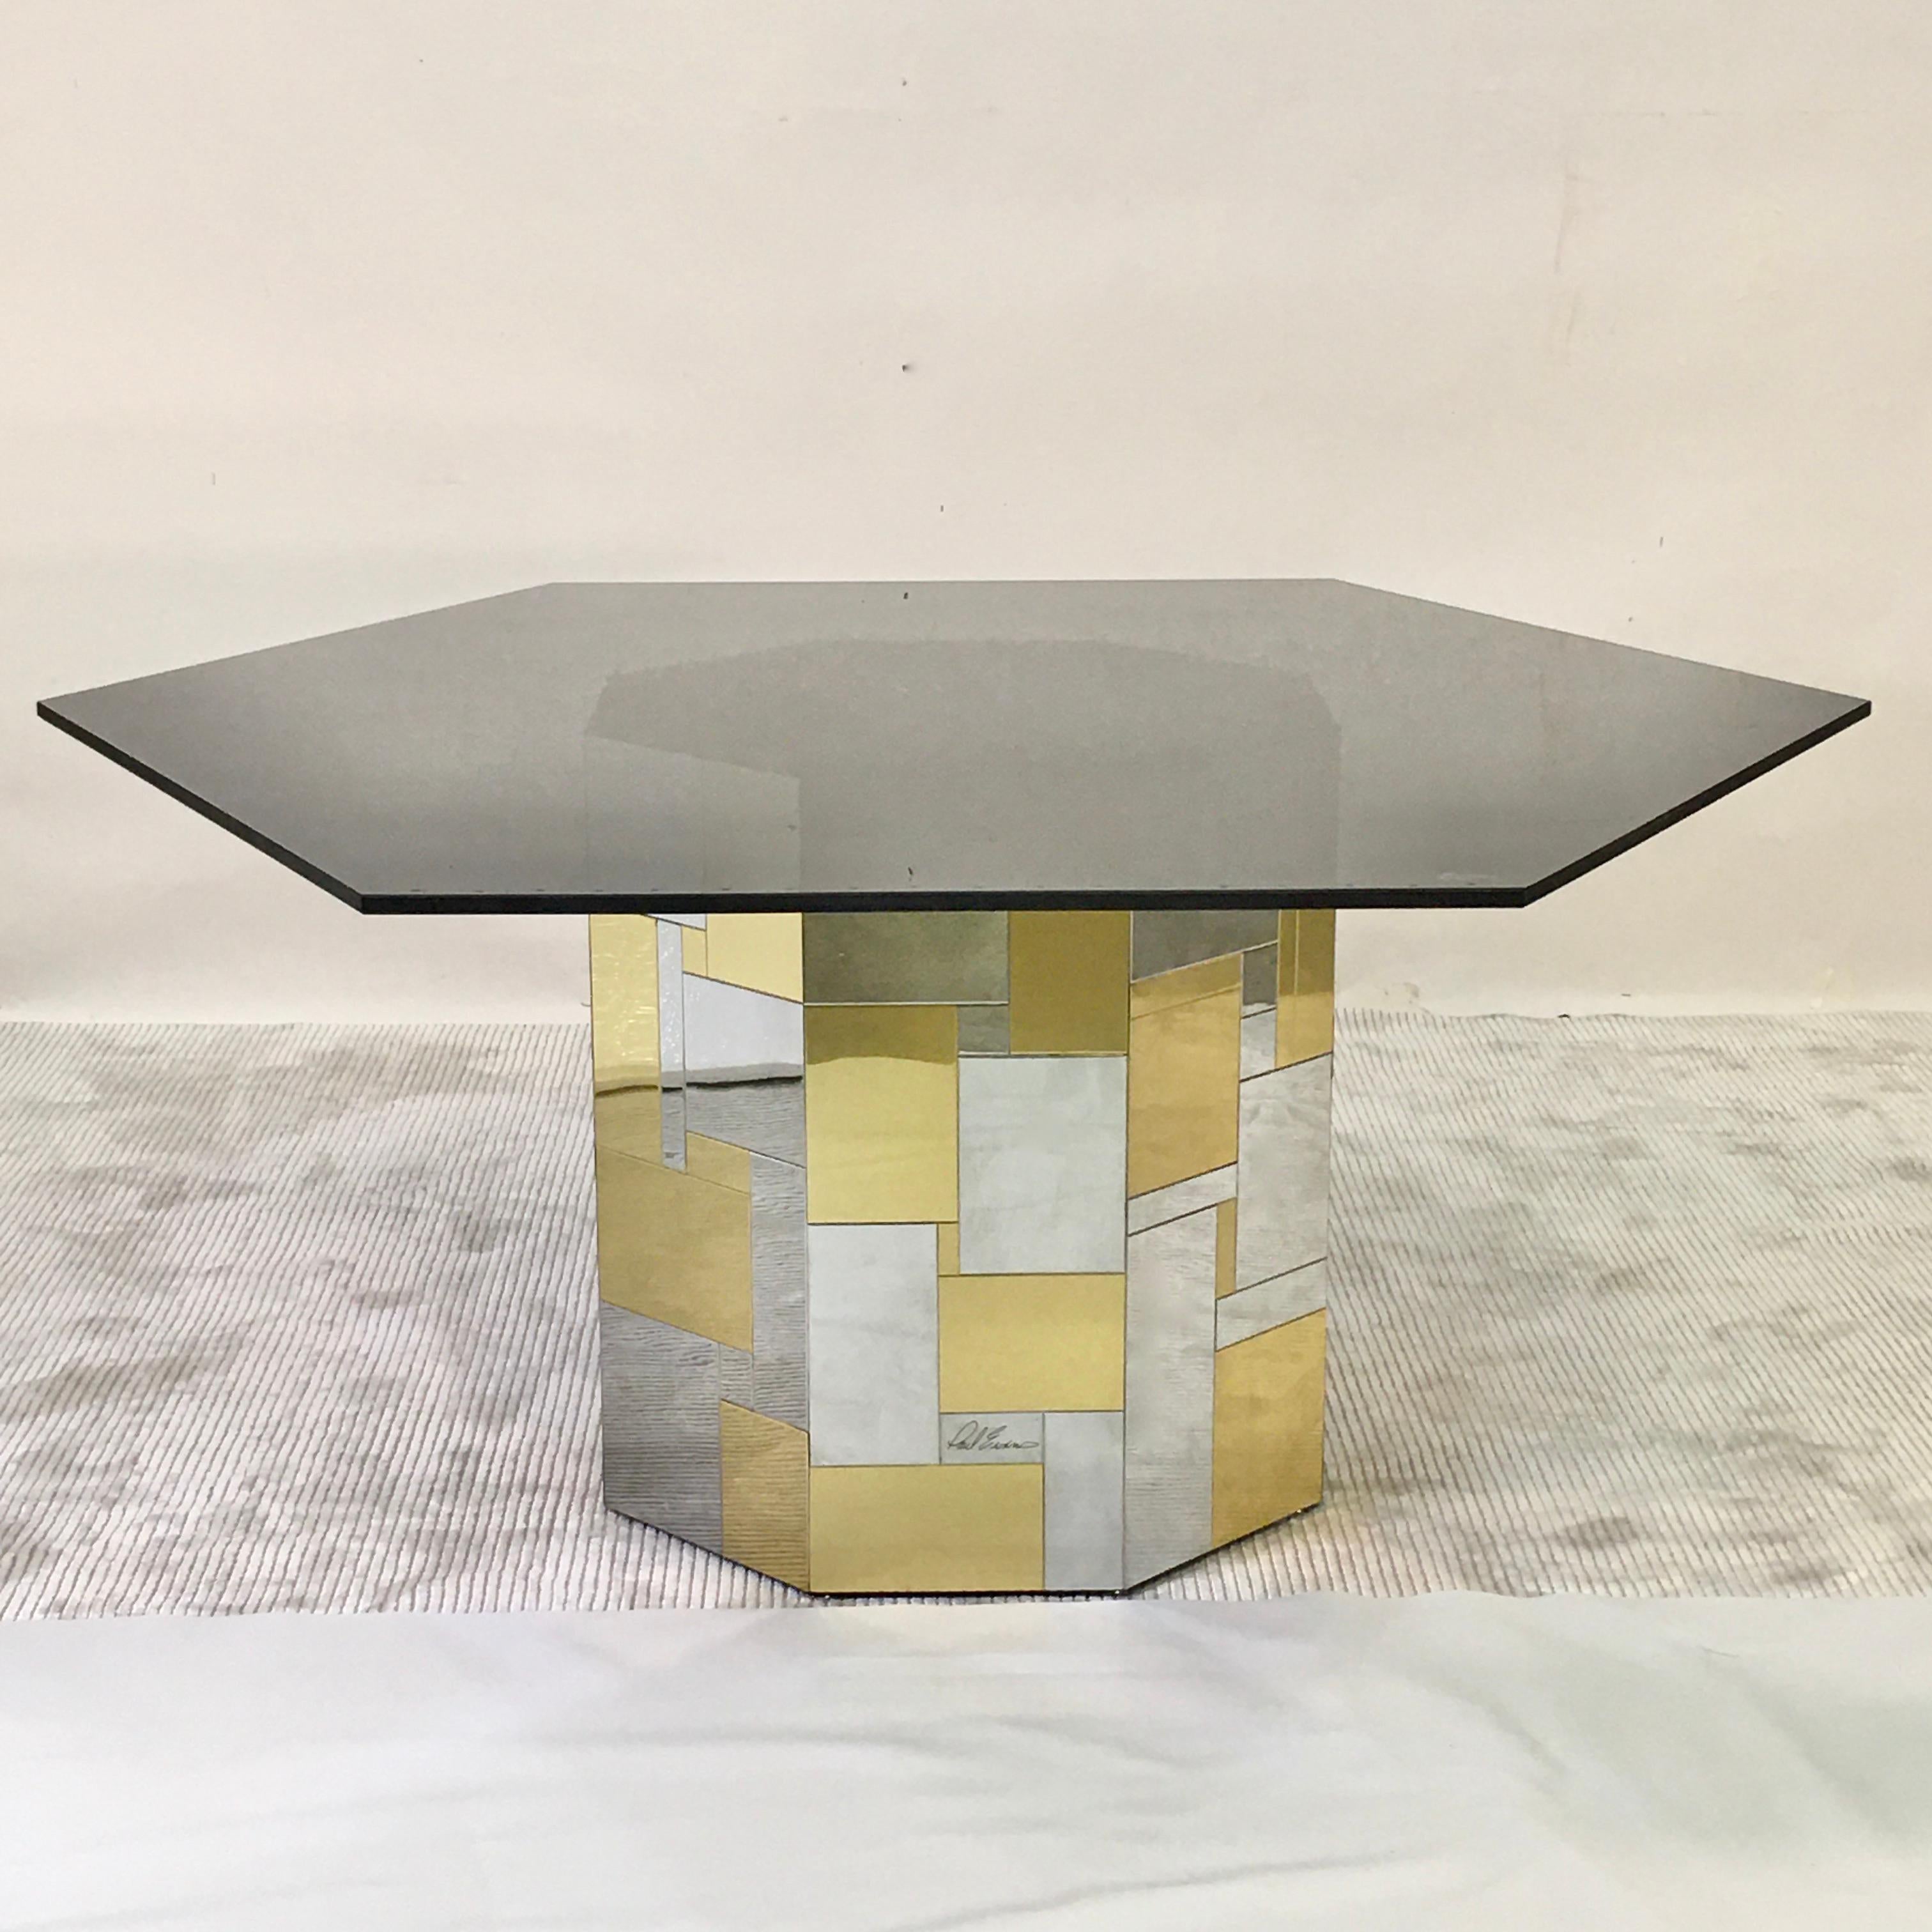 Hexagonal smoked black glass top on a signed Paul Evans brass and chrome patchwork tiled octagonal pedestal drum base. 
From his Cityscape Collection for Directional, 1972.
Total height 25 inches. Pedestal base alone is 24.5 inches high by 22.25